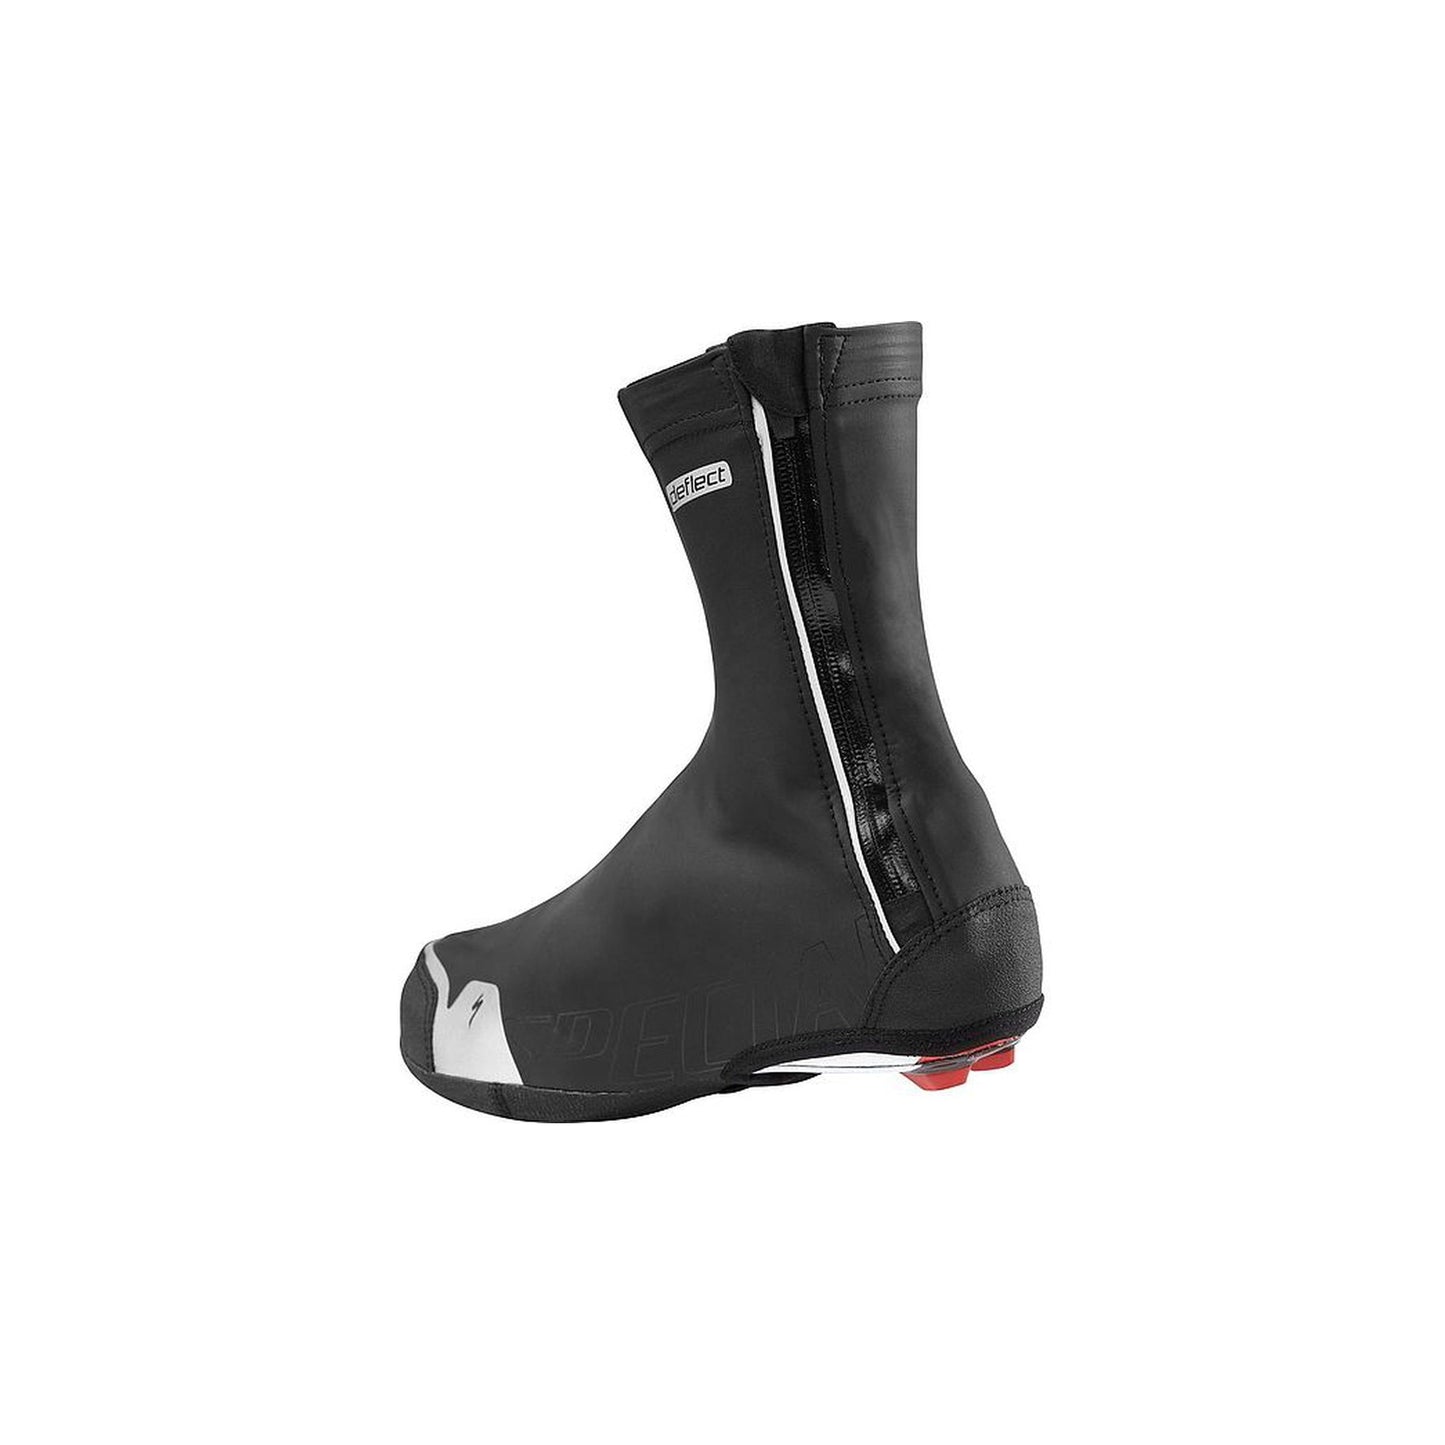 COMP RAIN SHOE COVER BLK 38-40-Bells-Cycling-Specialized